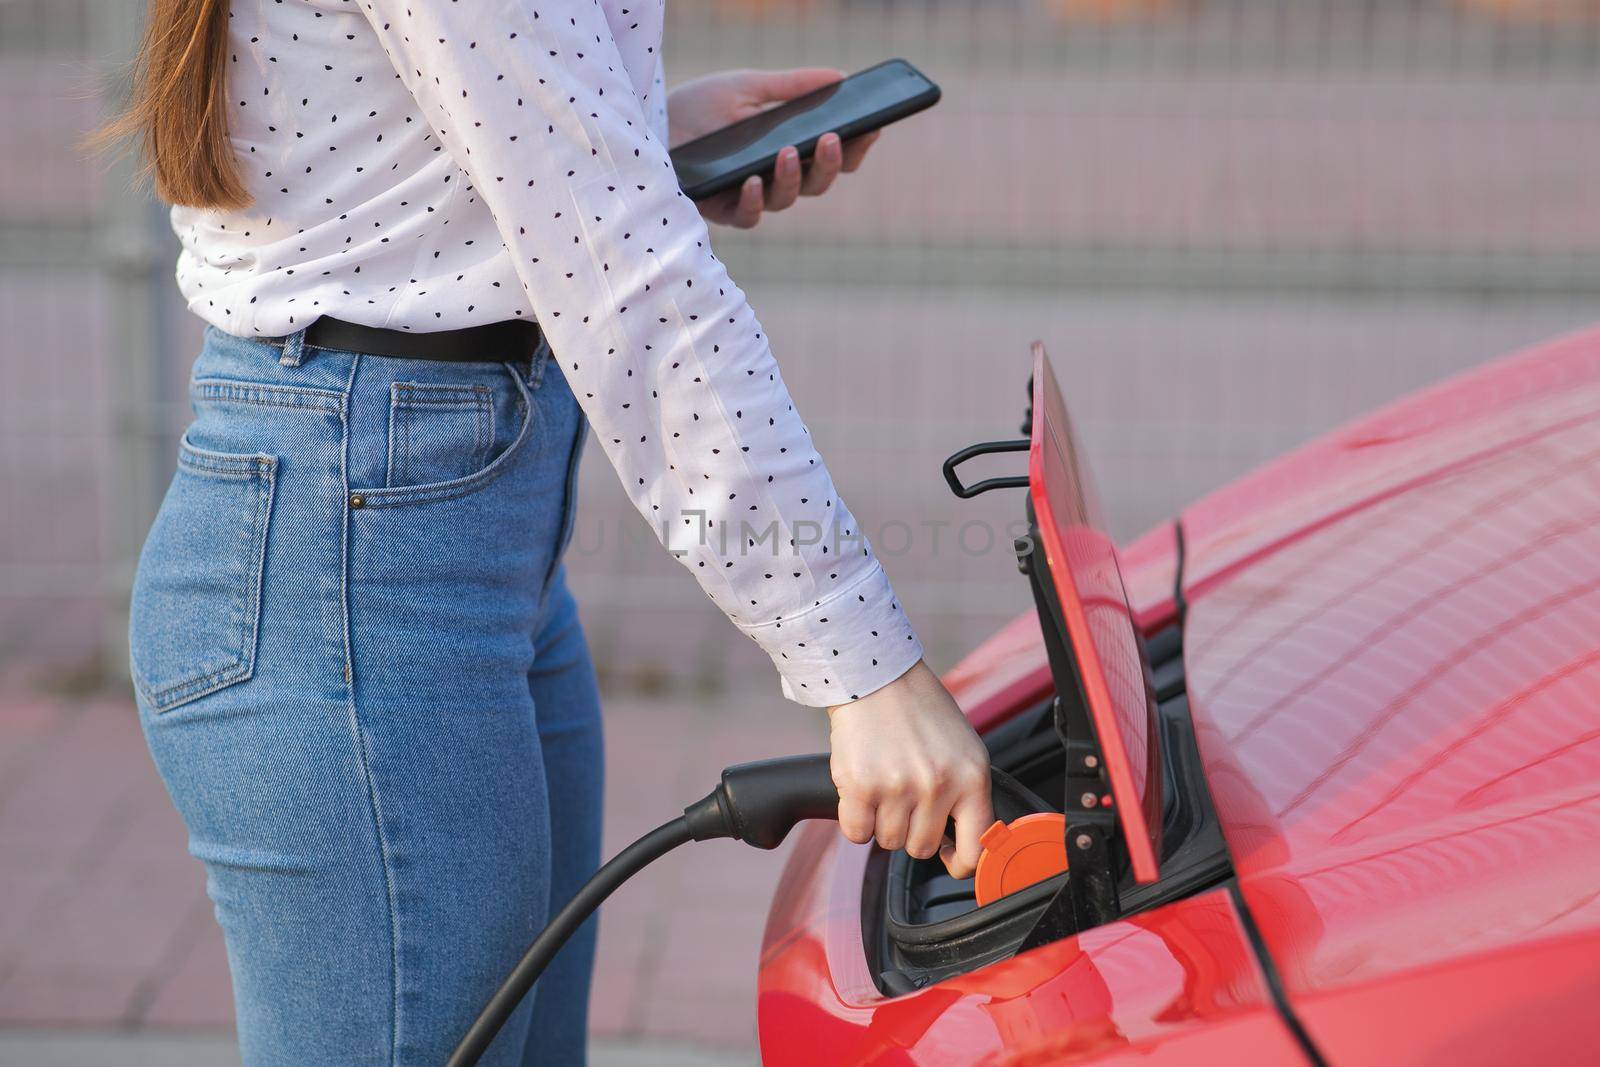 Caucasian girl using smart phone and waiting power supply connect to electric vehicles. Process of car's electrical recharge comes to end